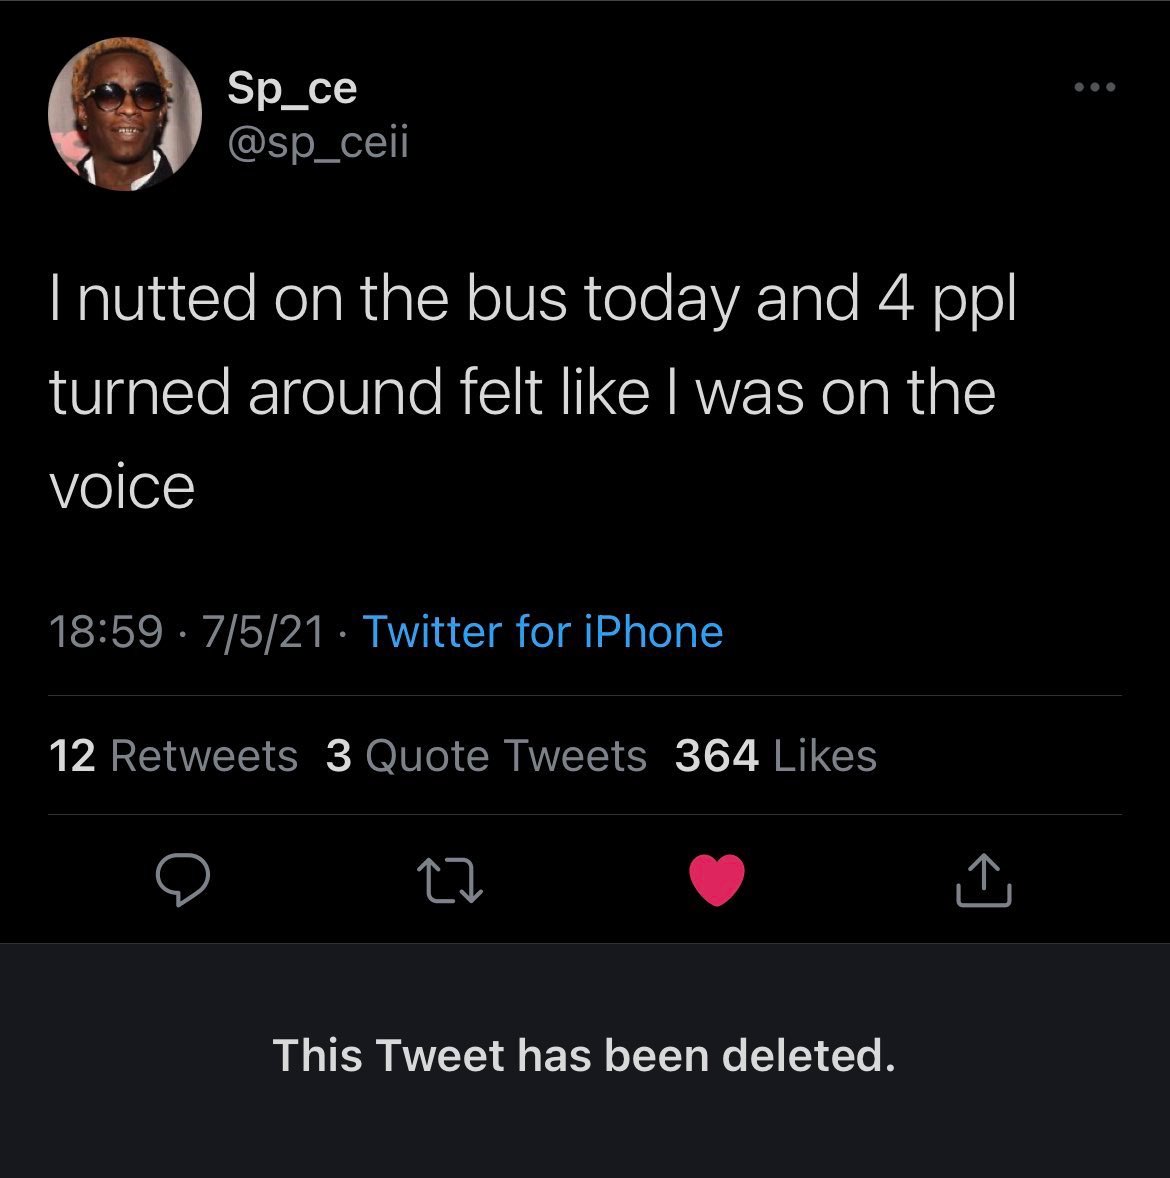 our favorite deleted tweets - nutted on the bus and three people turned around felt like i was on the voice - Sp_ce I nutted on the bus today and 4 ppl turned around felt I was on the voice 7521. Twitter for iPhone 12 3 Quote Tweets 364 27 This Tweet has 